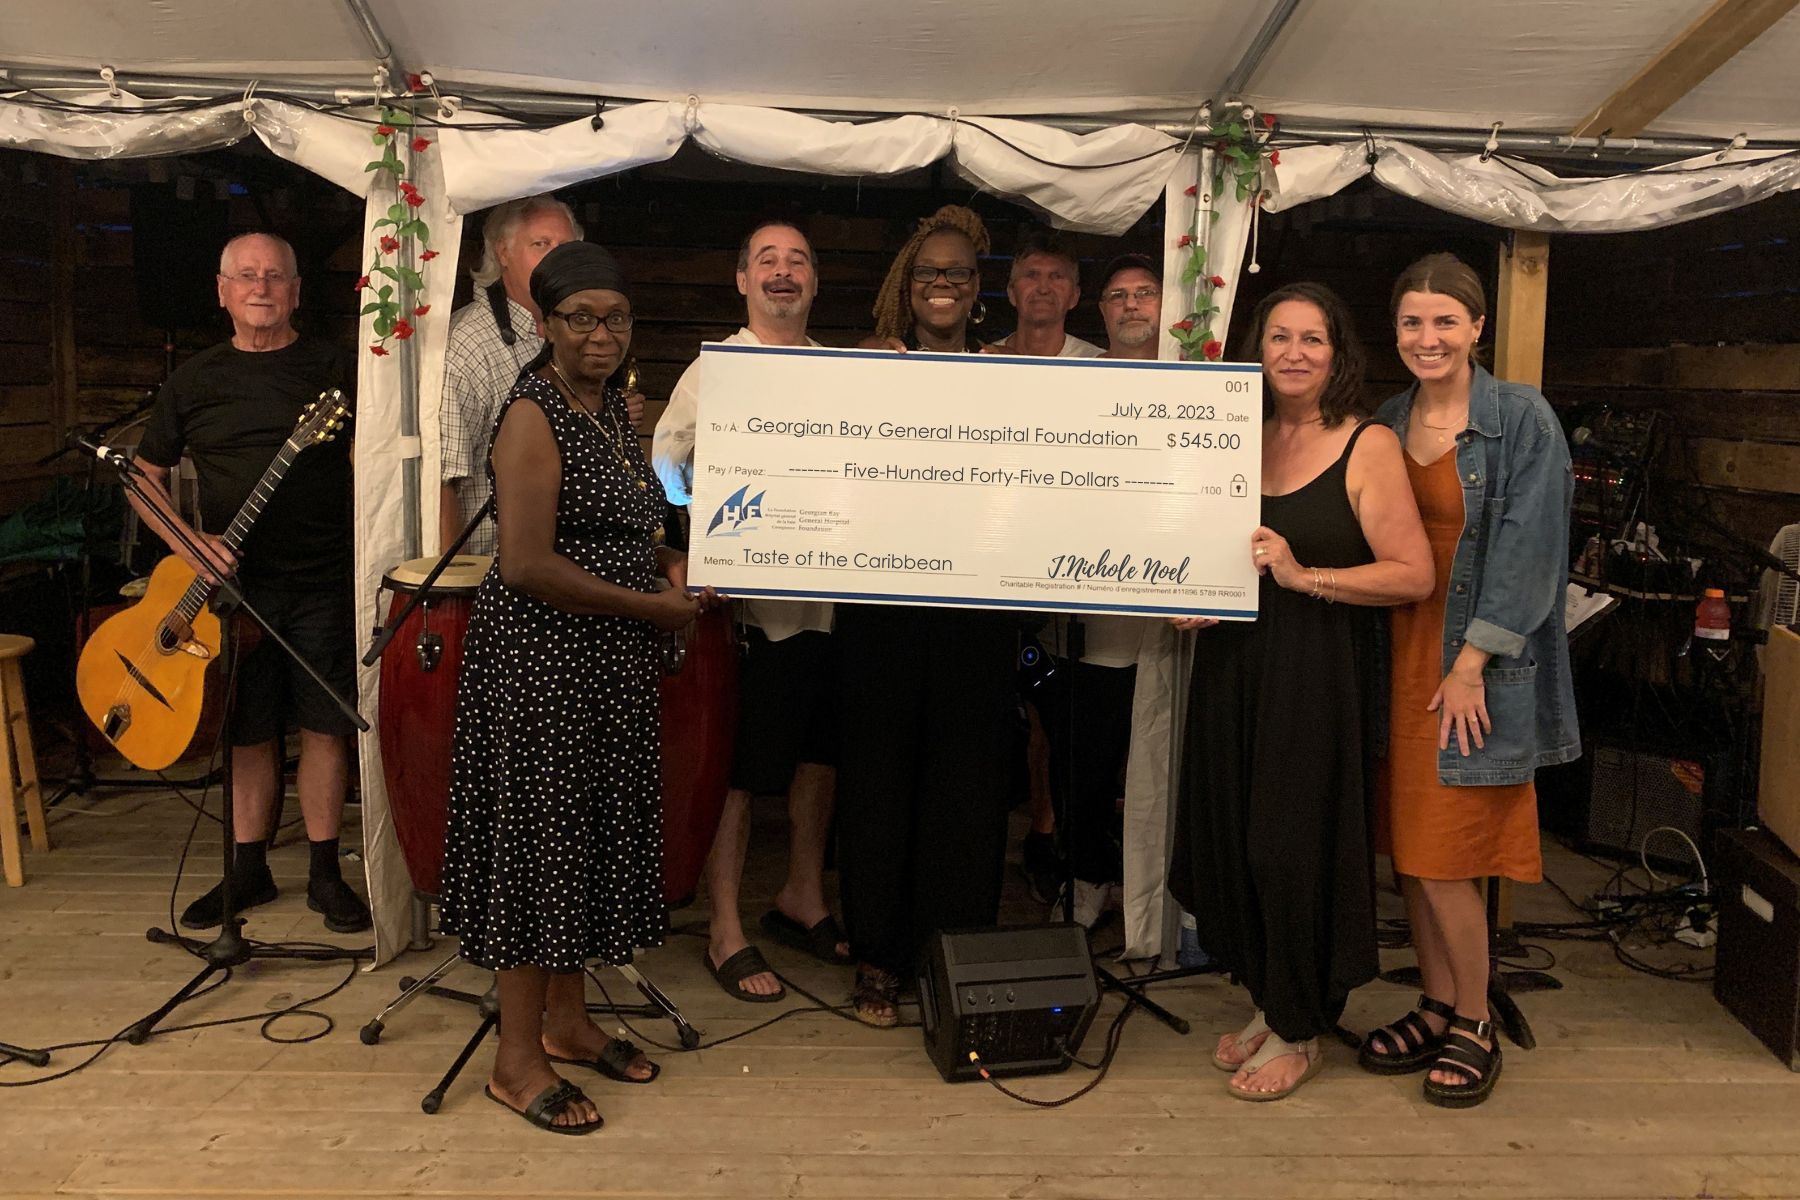 Four women and five men pose with a giant cheque made out to GBGH Foundation for $545 from the Taste of the Caribbean Event